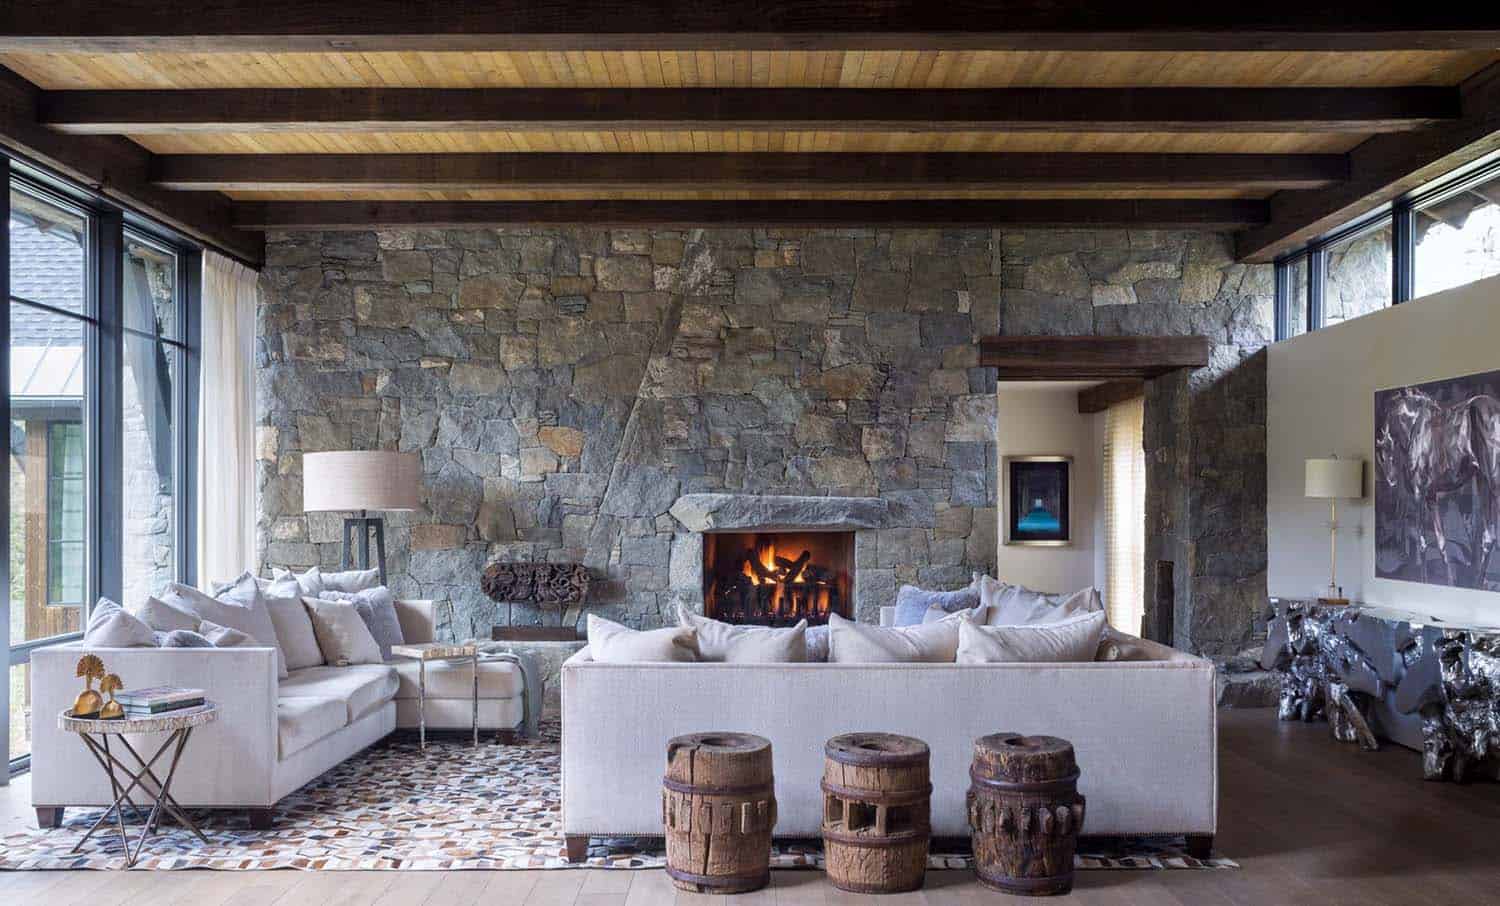 Mountain chalet in Colorado showcases rustic-contemporary styling